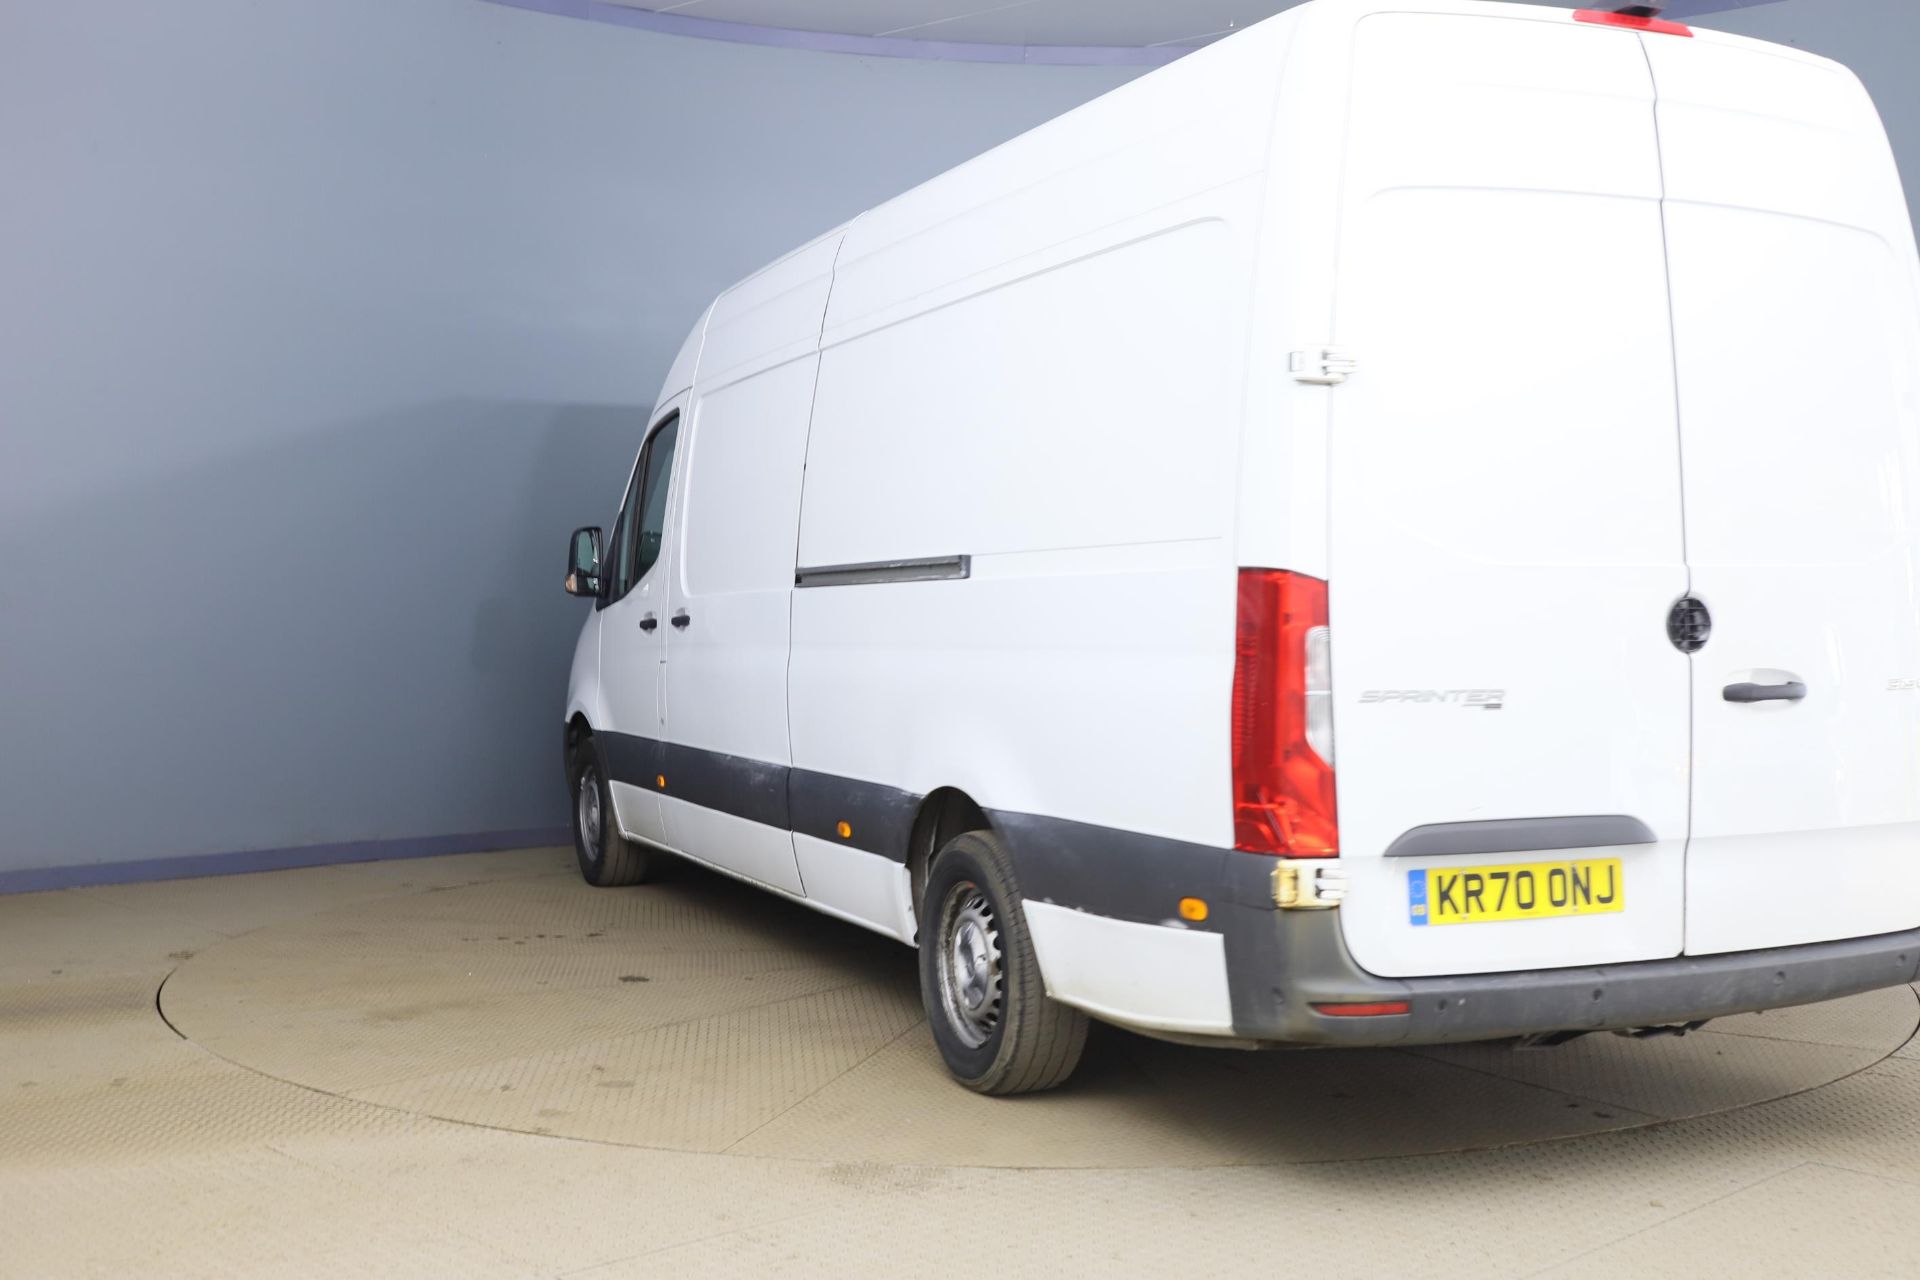 MERCEDES SPRINTER 315CDI "LWB" HIGH TOP "70 REG" 2021 MODEL - 1 Owner From New - Euro 6 - Image 3 of 12